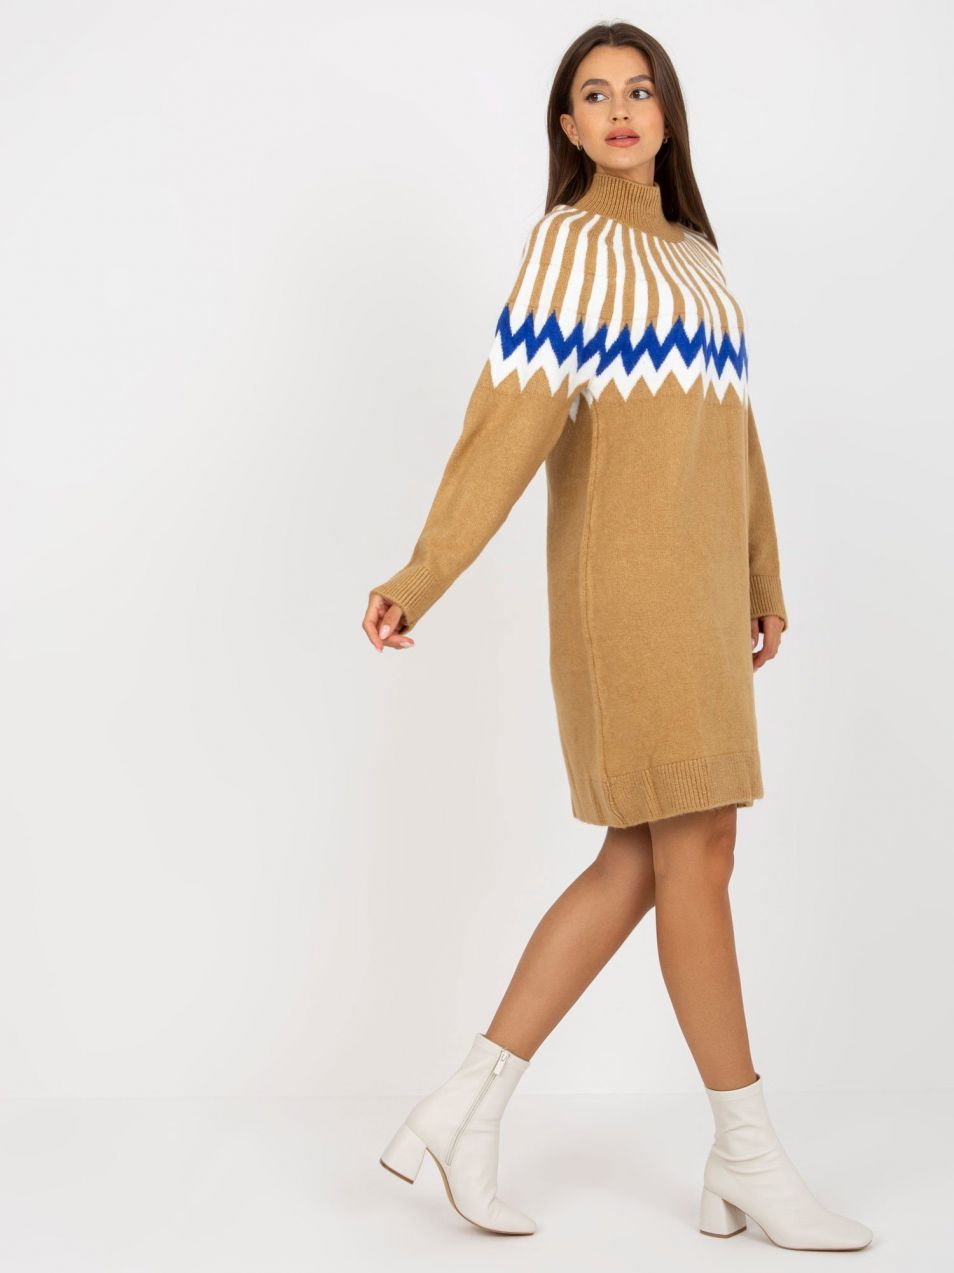 Camel knitted dress with patterns RUE PARIS